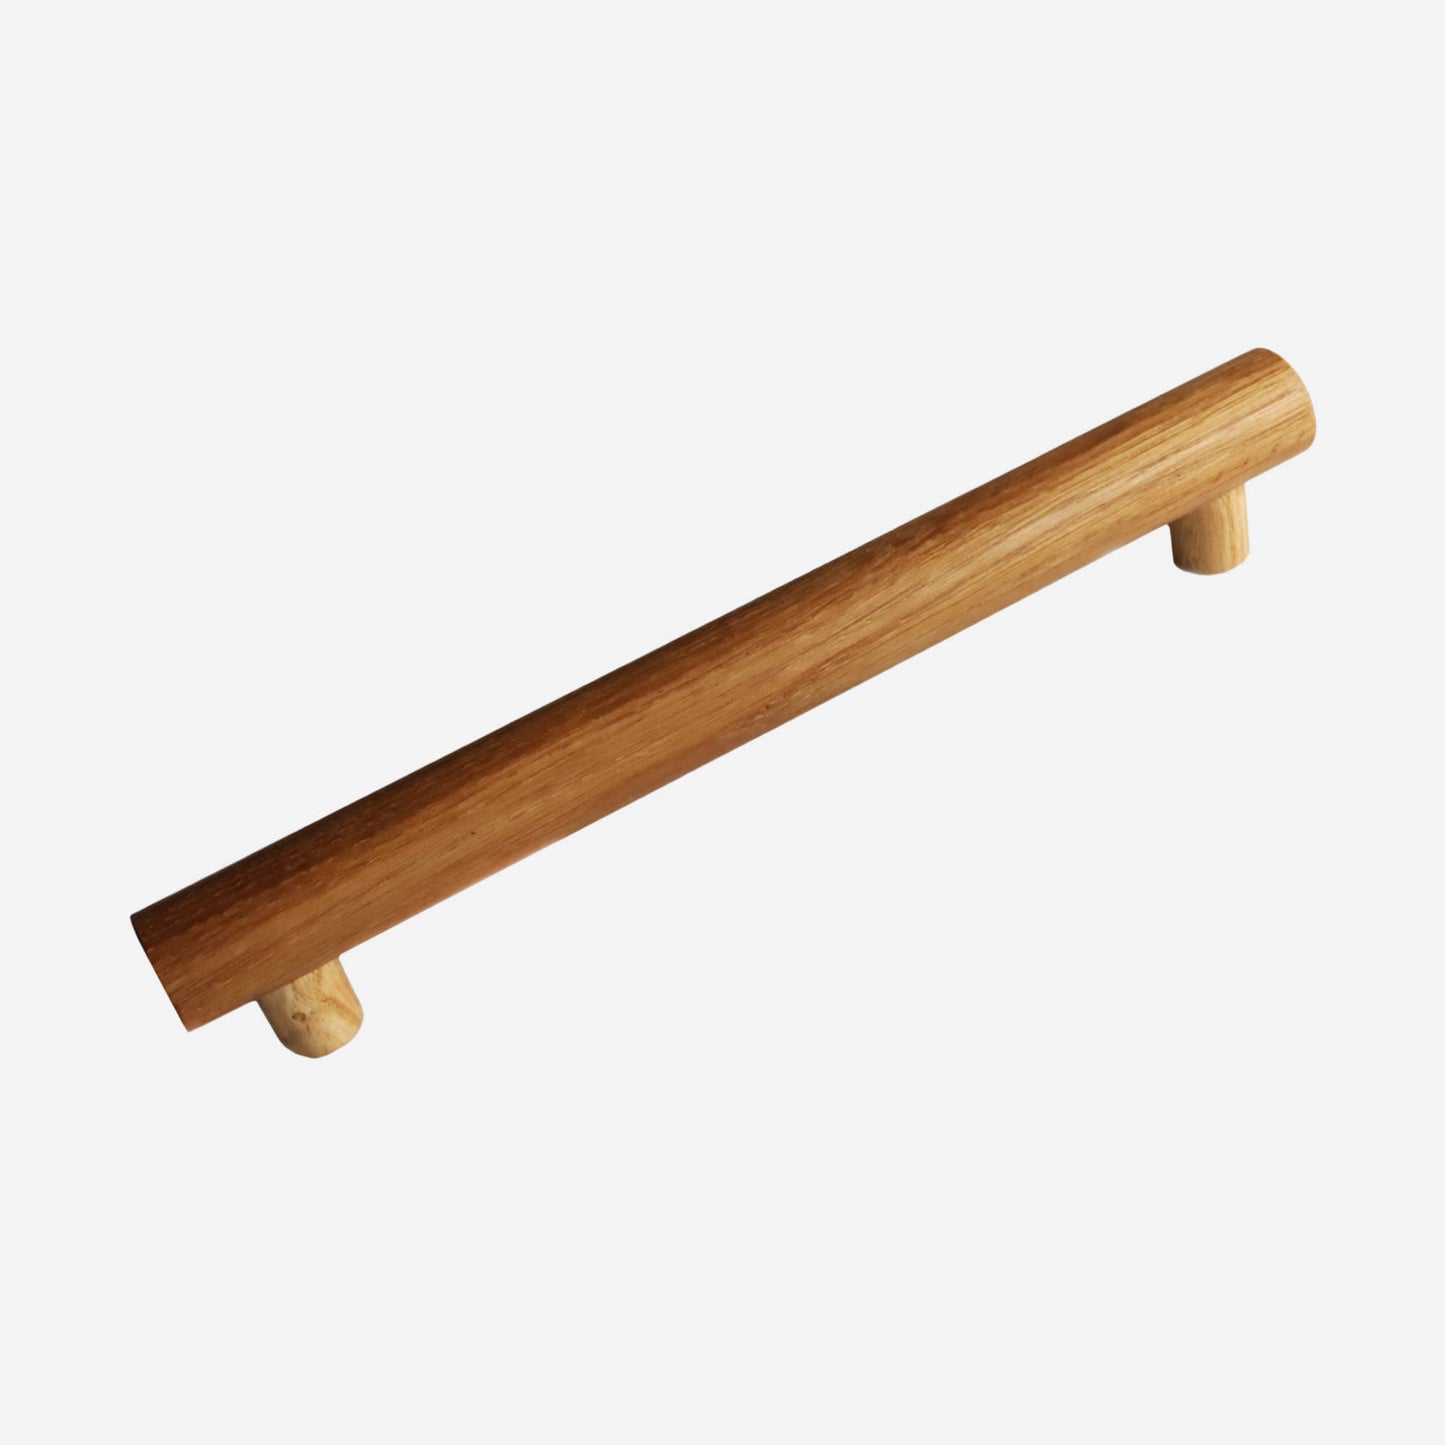 A straight, cylindrical wooden handle with two smaller cylindrical attachments on one side.